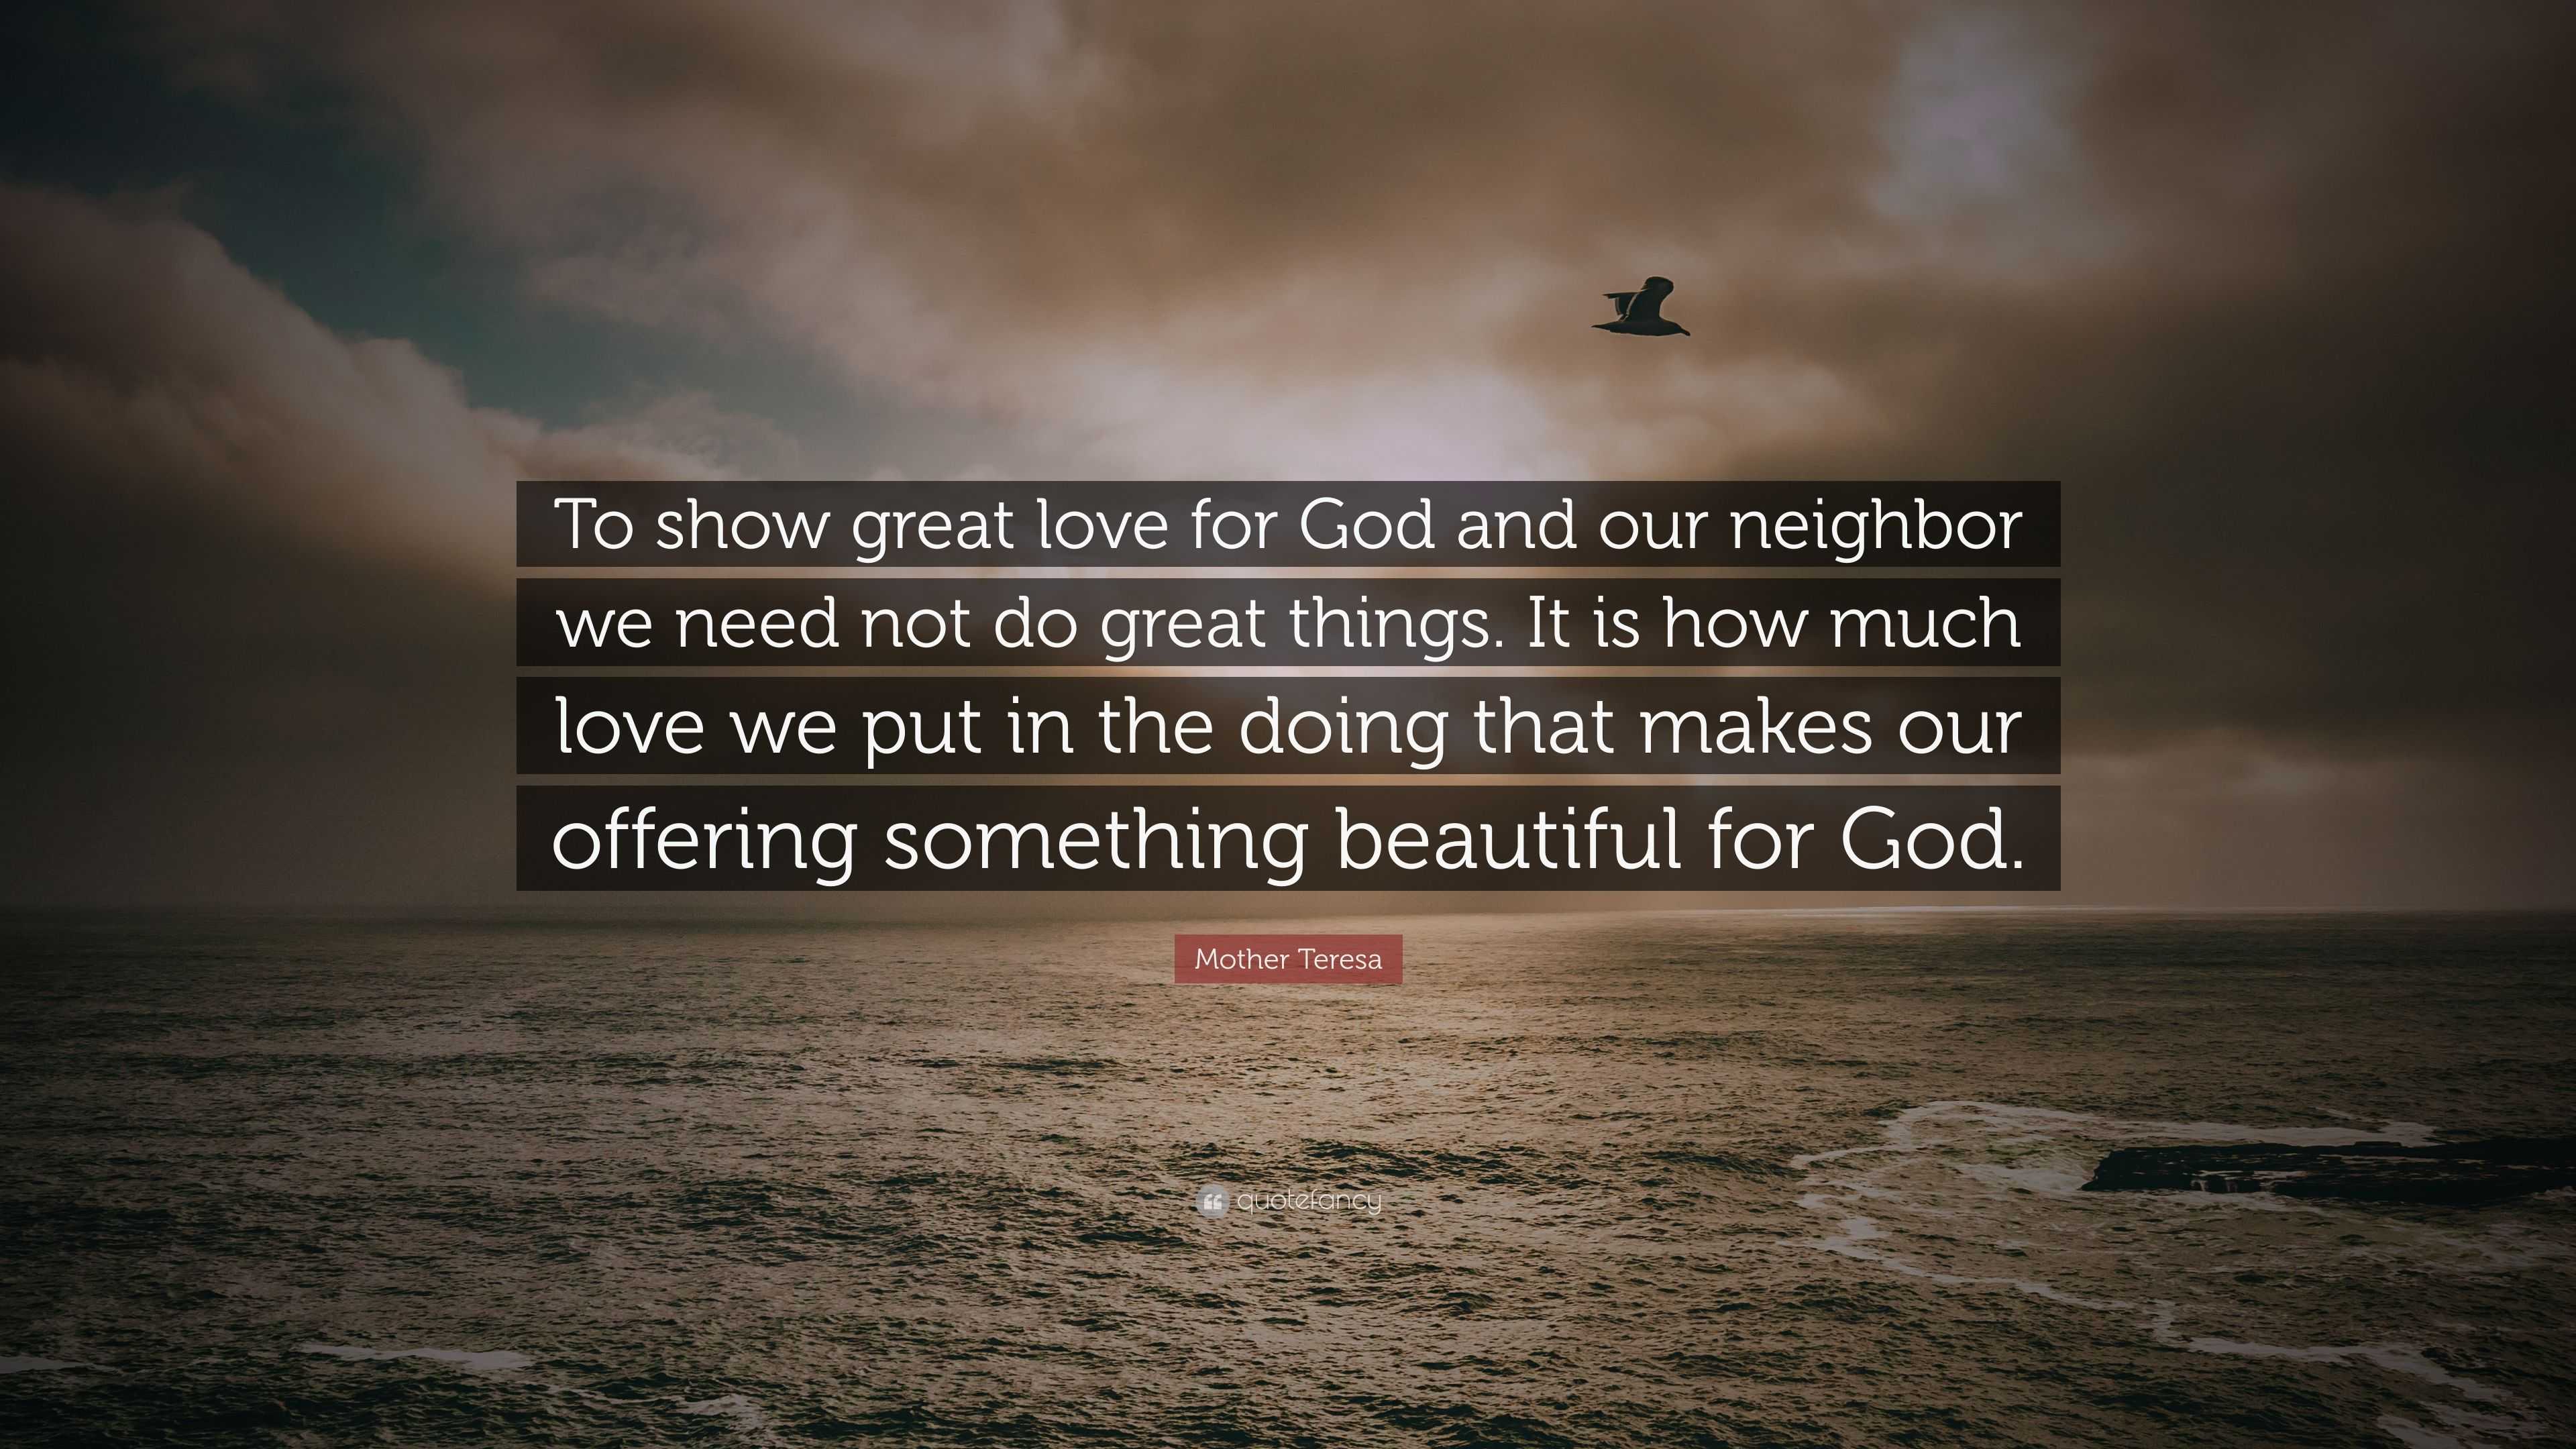 Mother Teresa Quote “To show great love for God and our neighbor we need